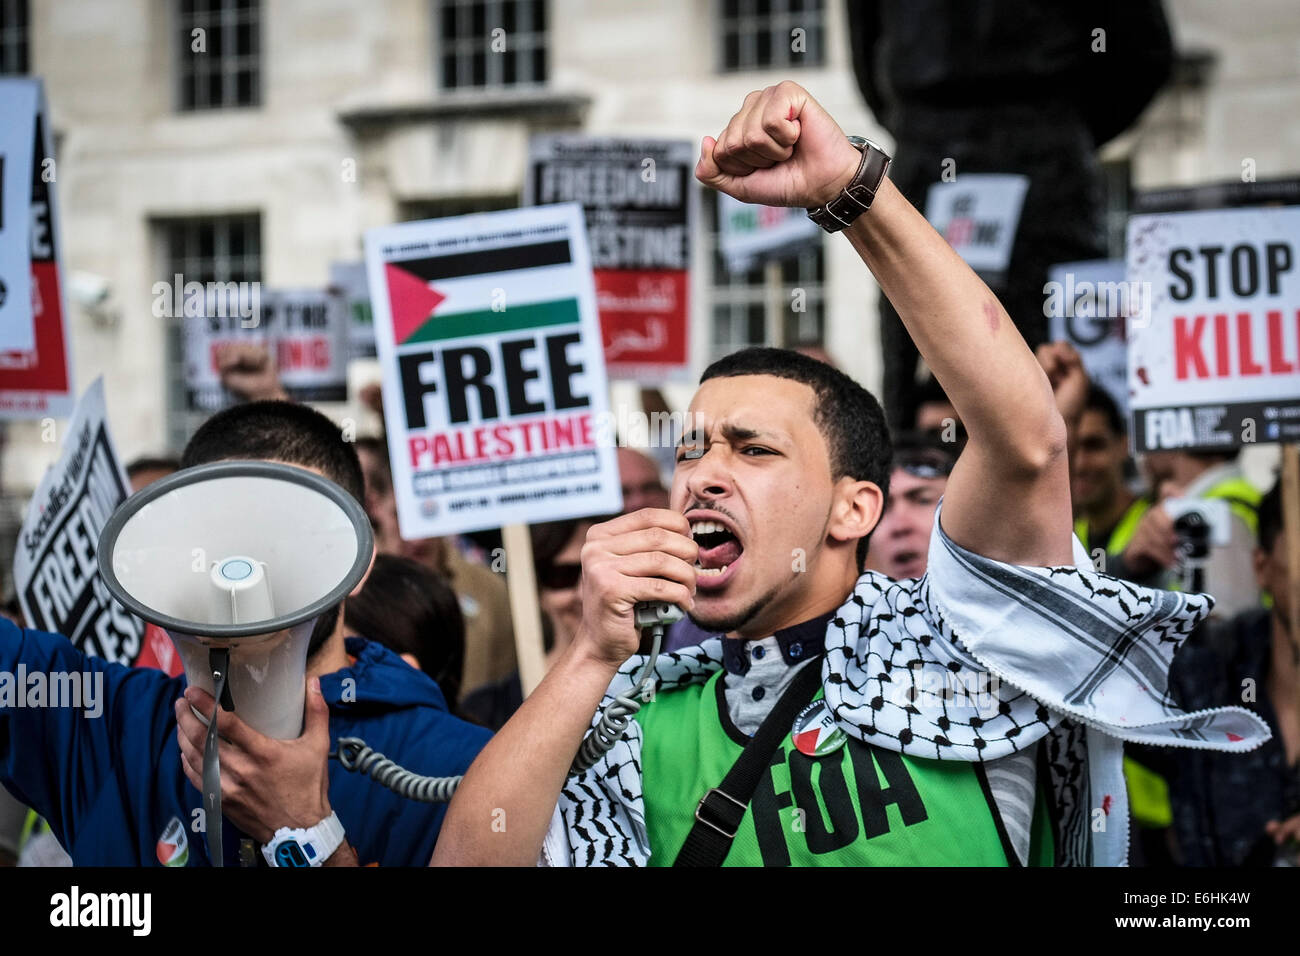 Pro-Palestinian protesters demonstrate outside Downing street against arms sales to Israel. Stock Photo